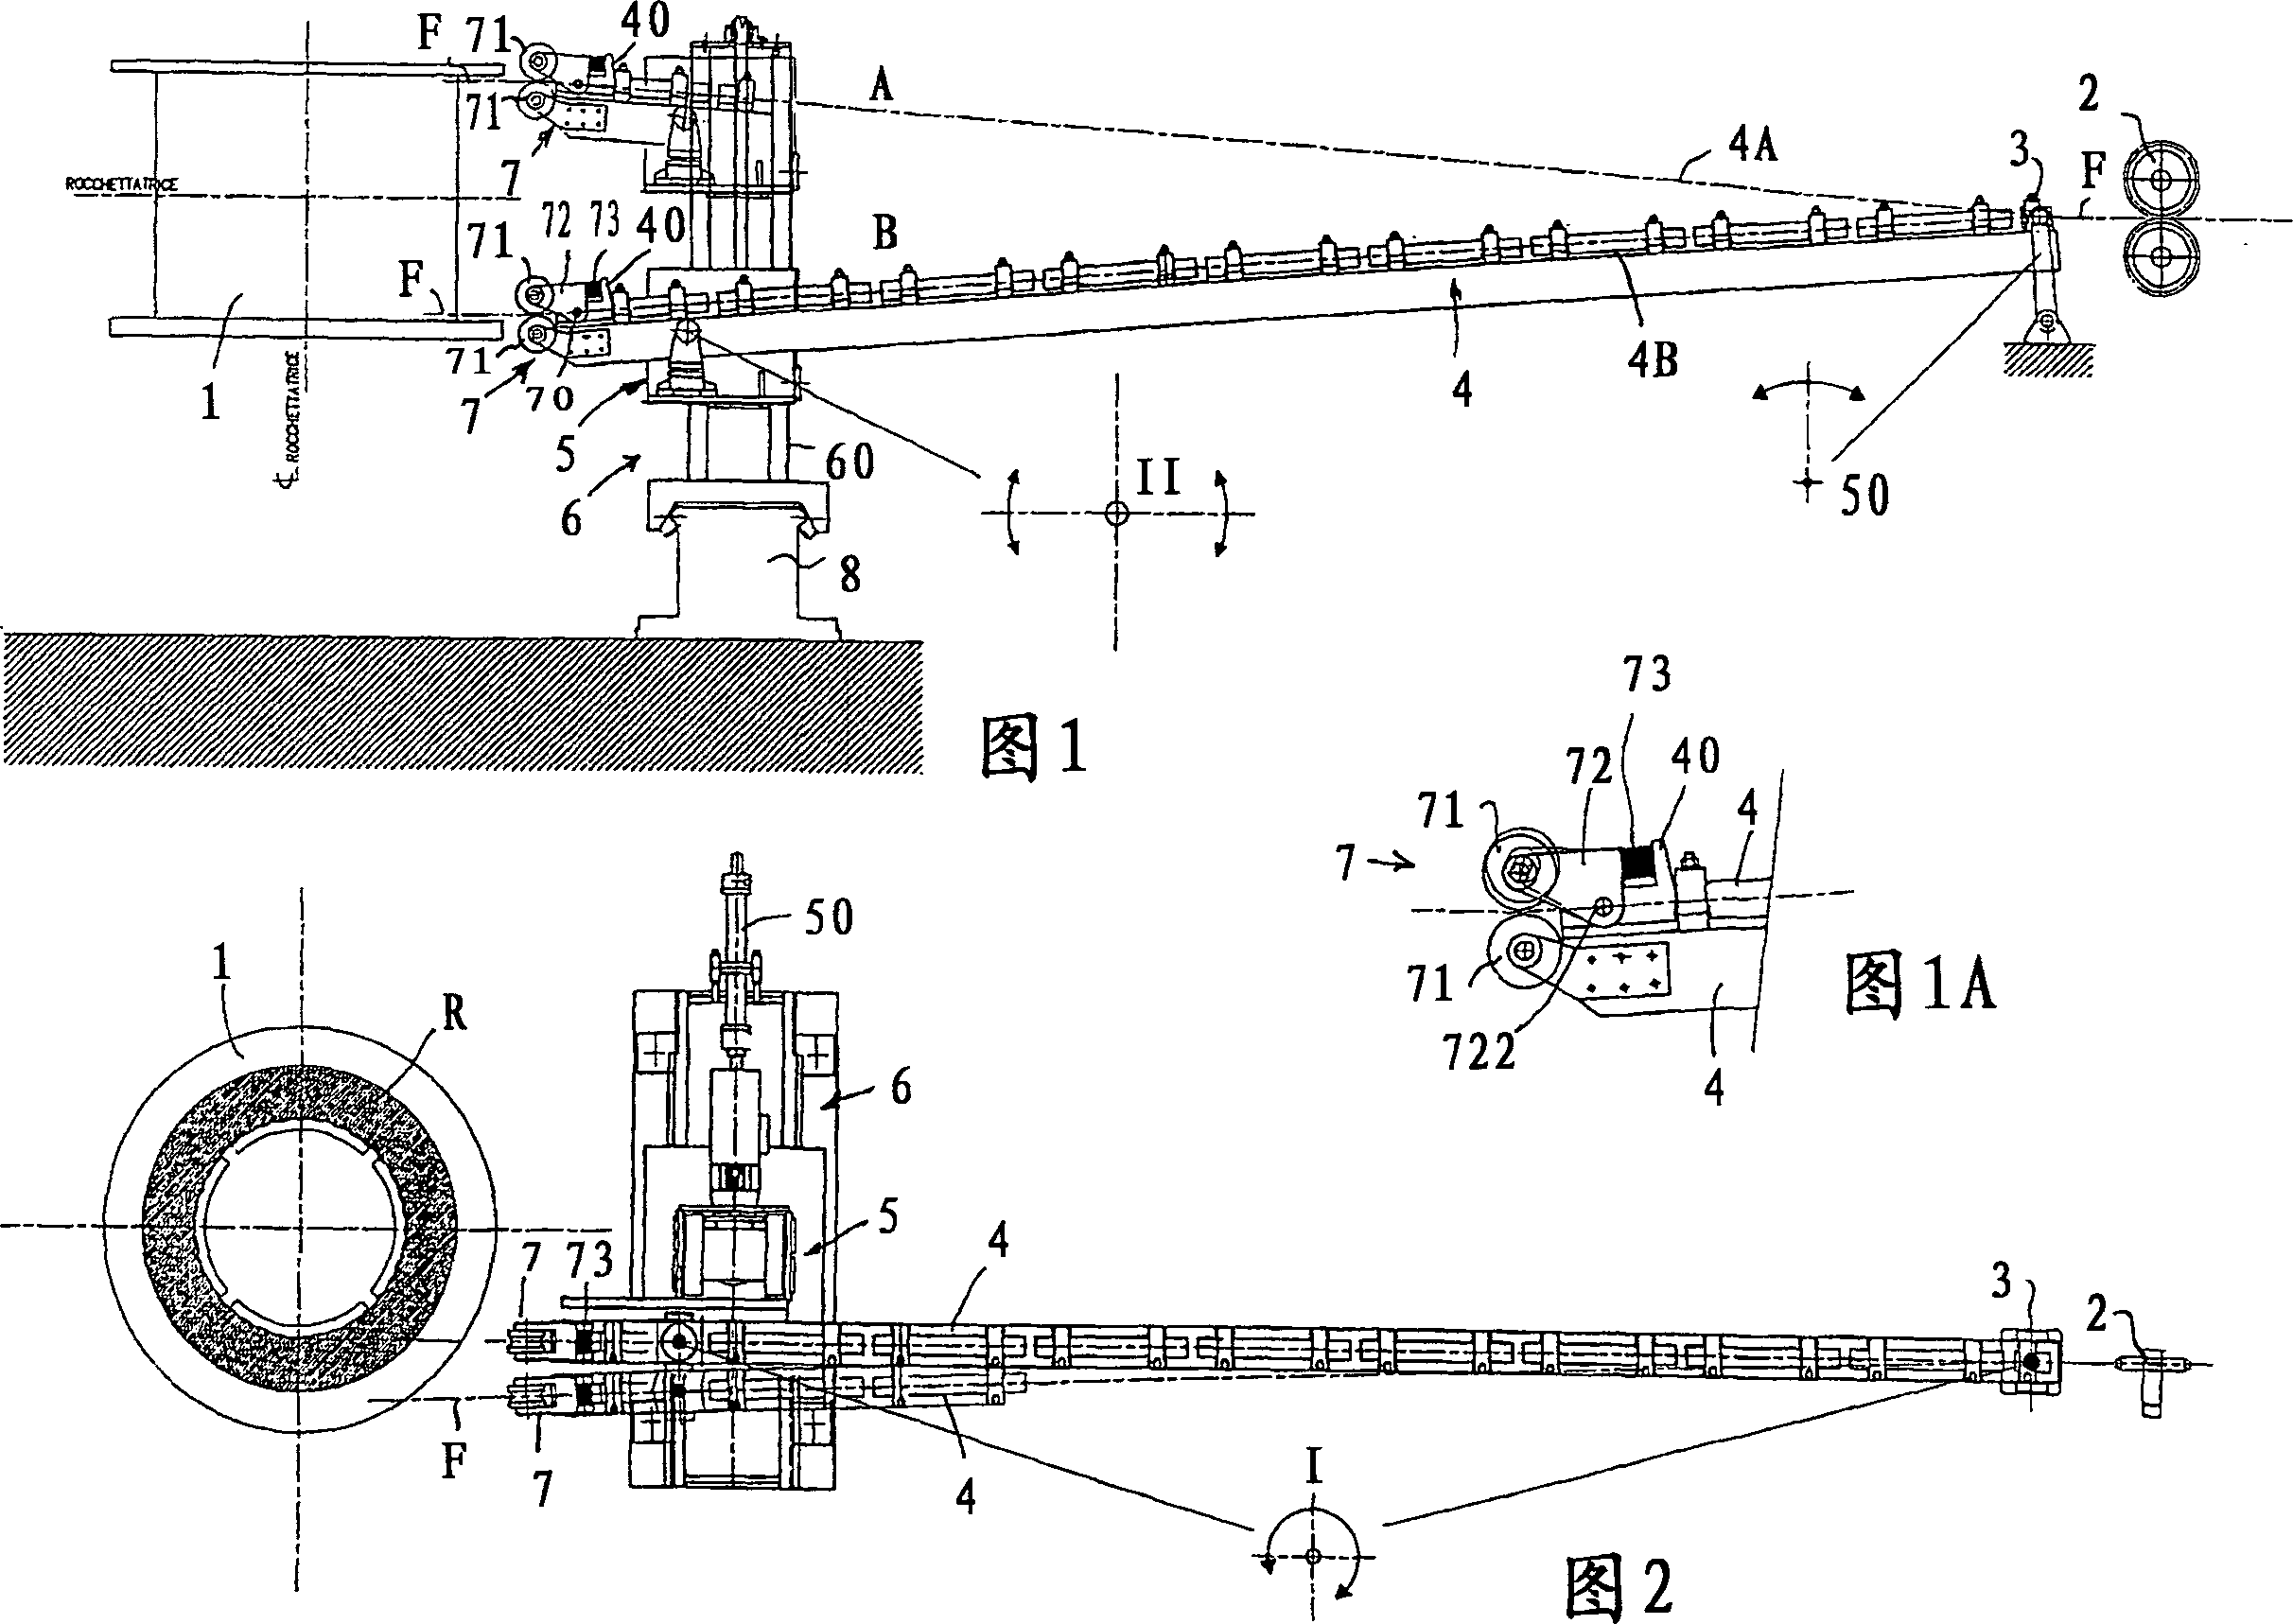 Improved winding-machine for rolled or drawn wire/rod